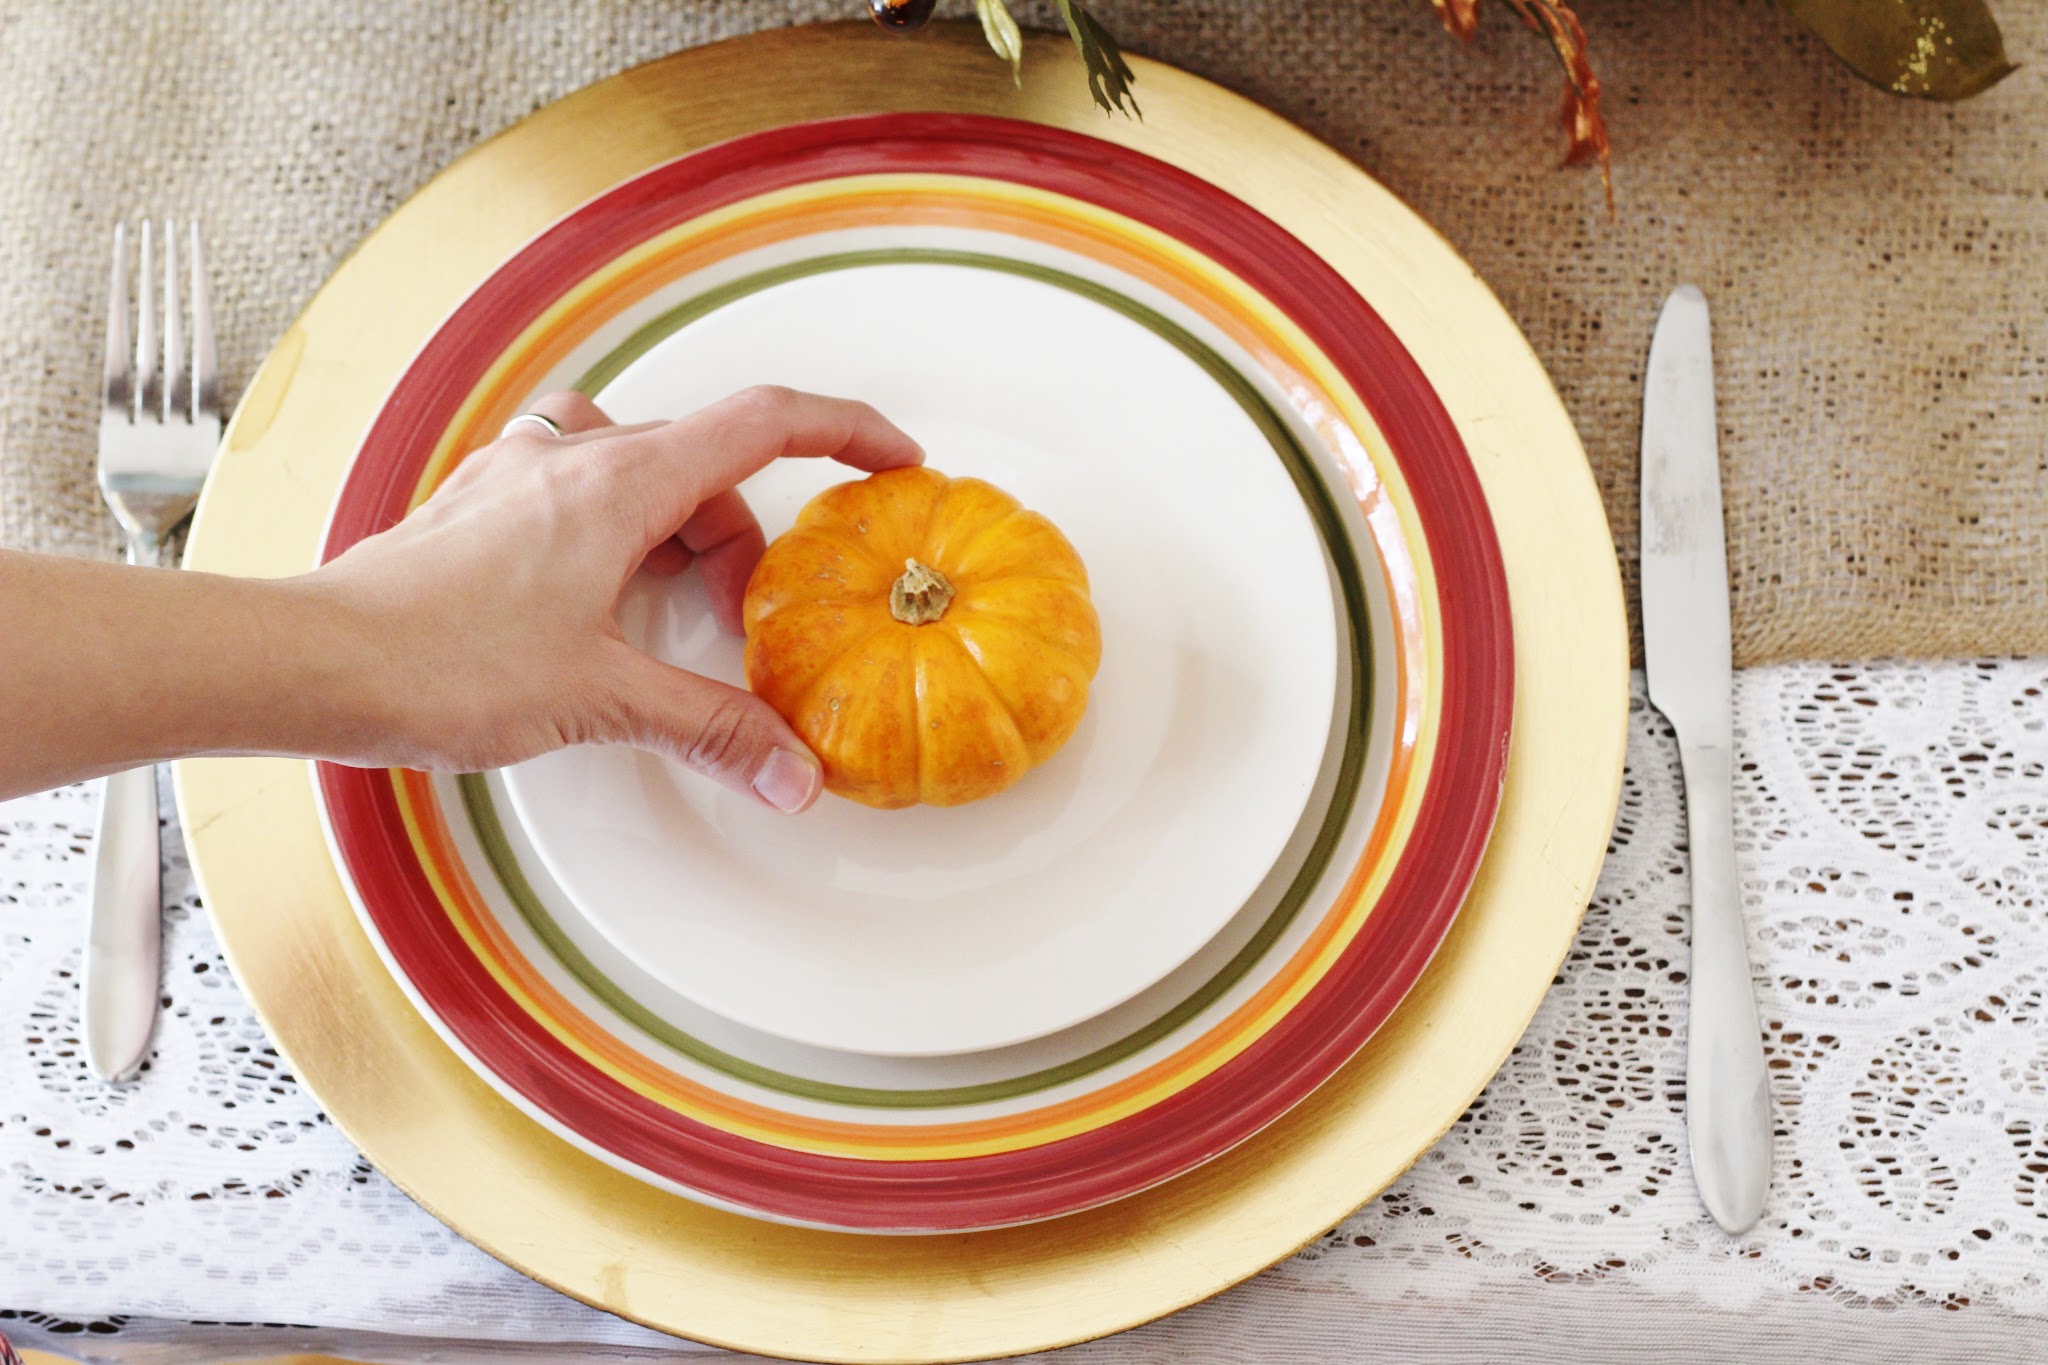 How to set a table for Thanksgiving. Thanksgiving table. Thanksgiving table setting ideas. Traditional Thanksgiving table setting. Thanksgiving table setting with food. DIY Thanksgiving table settings. Thanksgiving table with food. Modern thanksgiving table setting. Inexpensive Thanksgiving table decorations. #thanksgiving #holiday #table #home #decor #diy #tablescape #fall